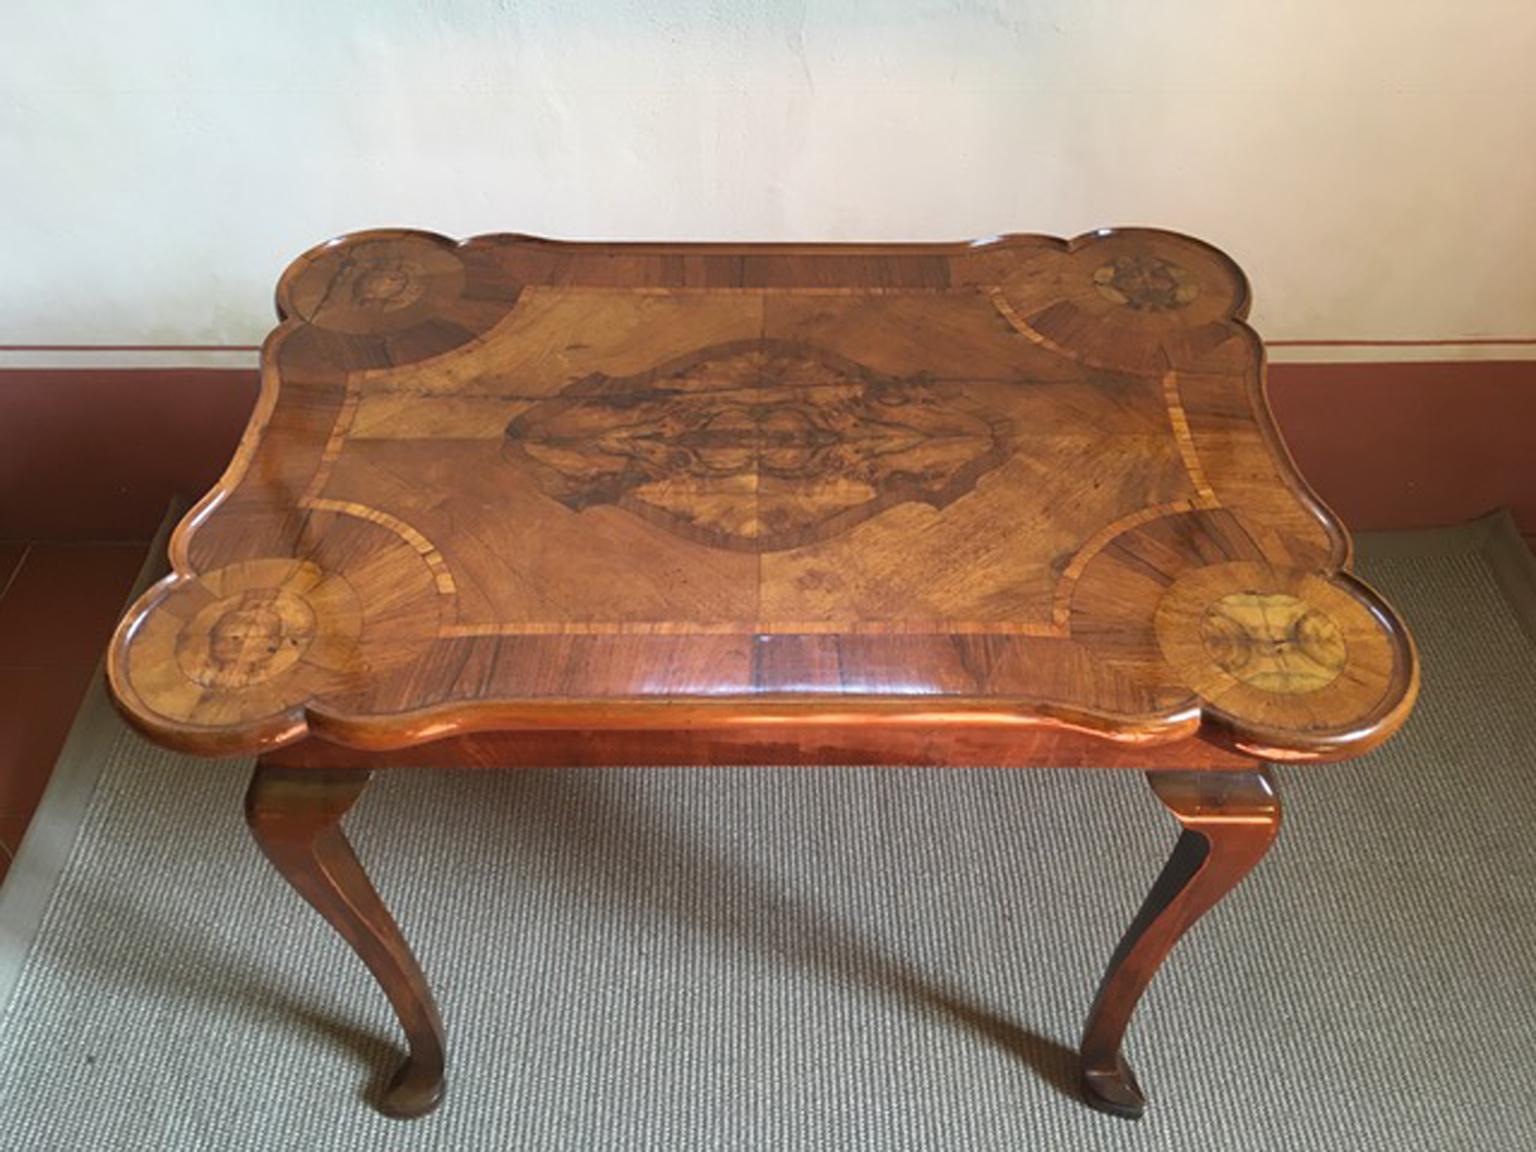 Hand-Crafted Italy Late 18th Century Regency Walnut Desk or Side Table For Sale